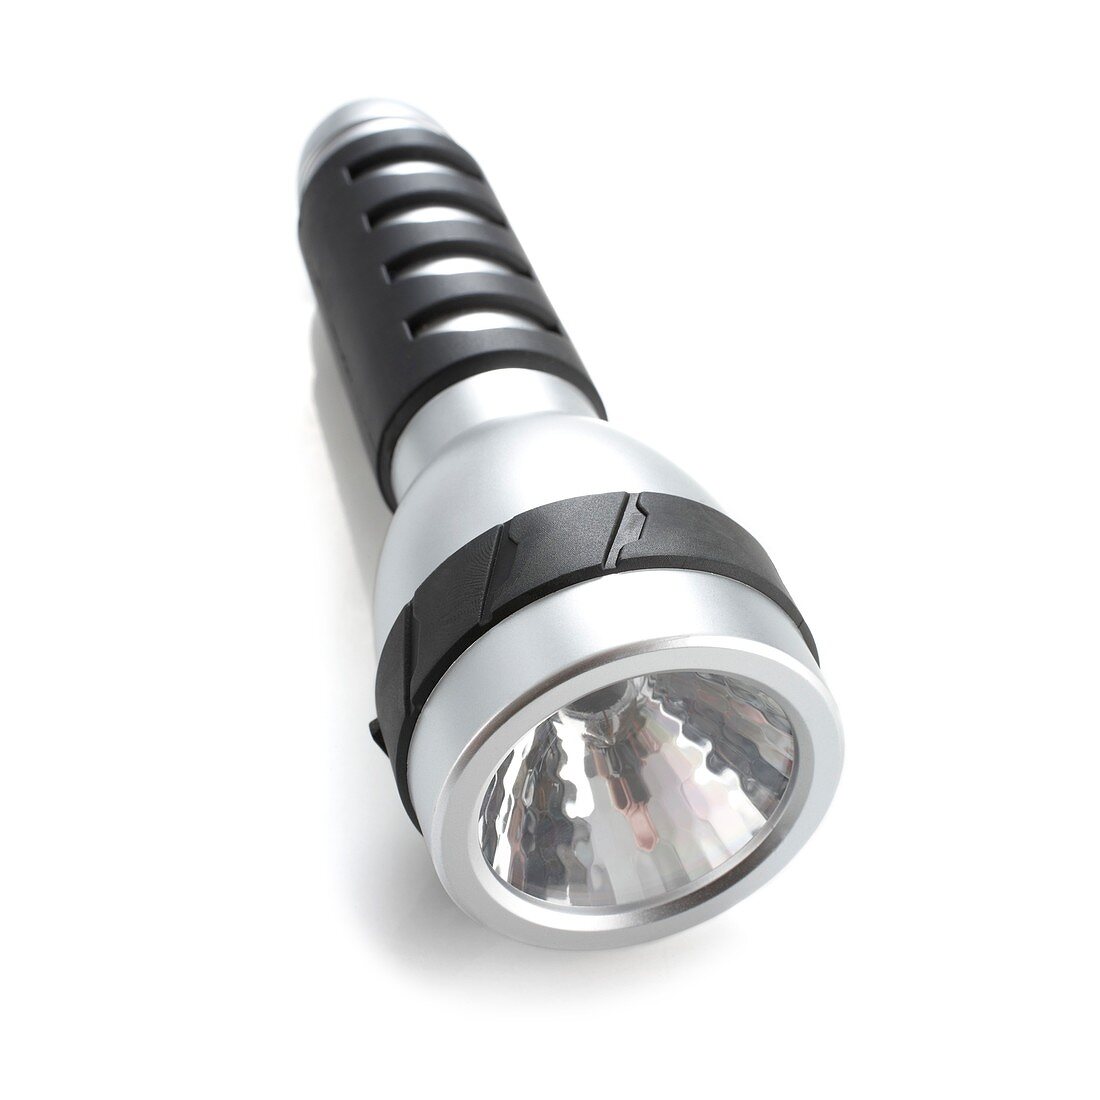 Lithium-ion rechargeable torch